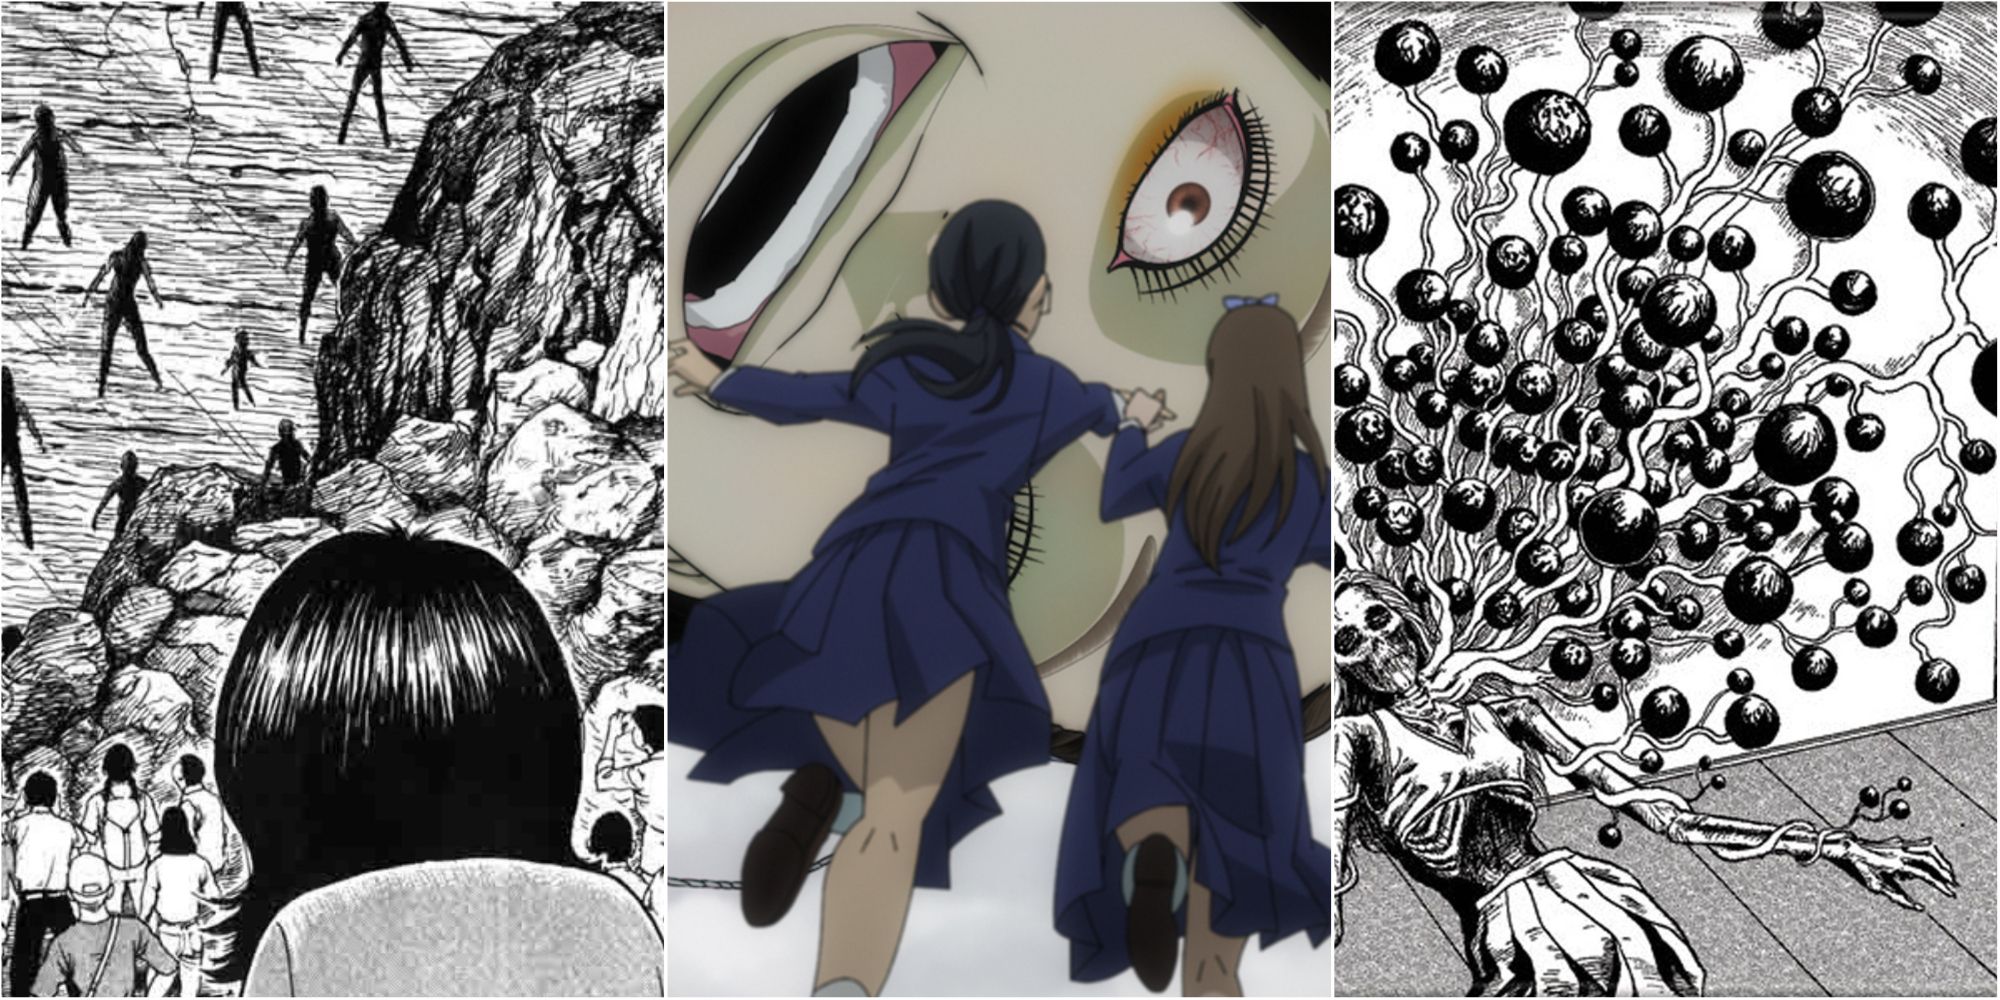 Netflix Announces New Junji Ito Anime Series 'Maniac: Tales of the Macabre'